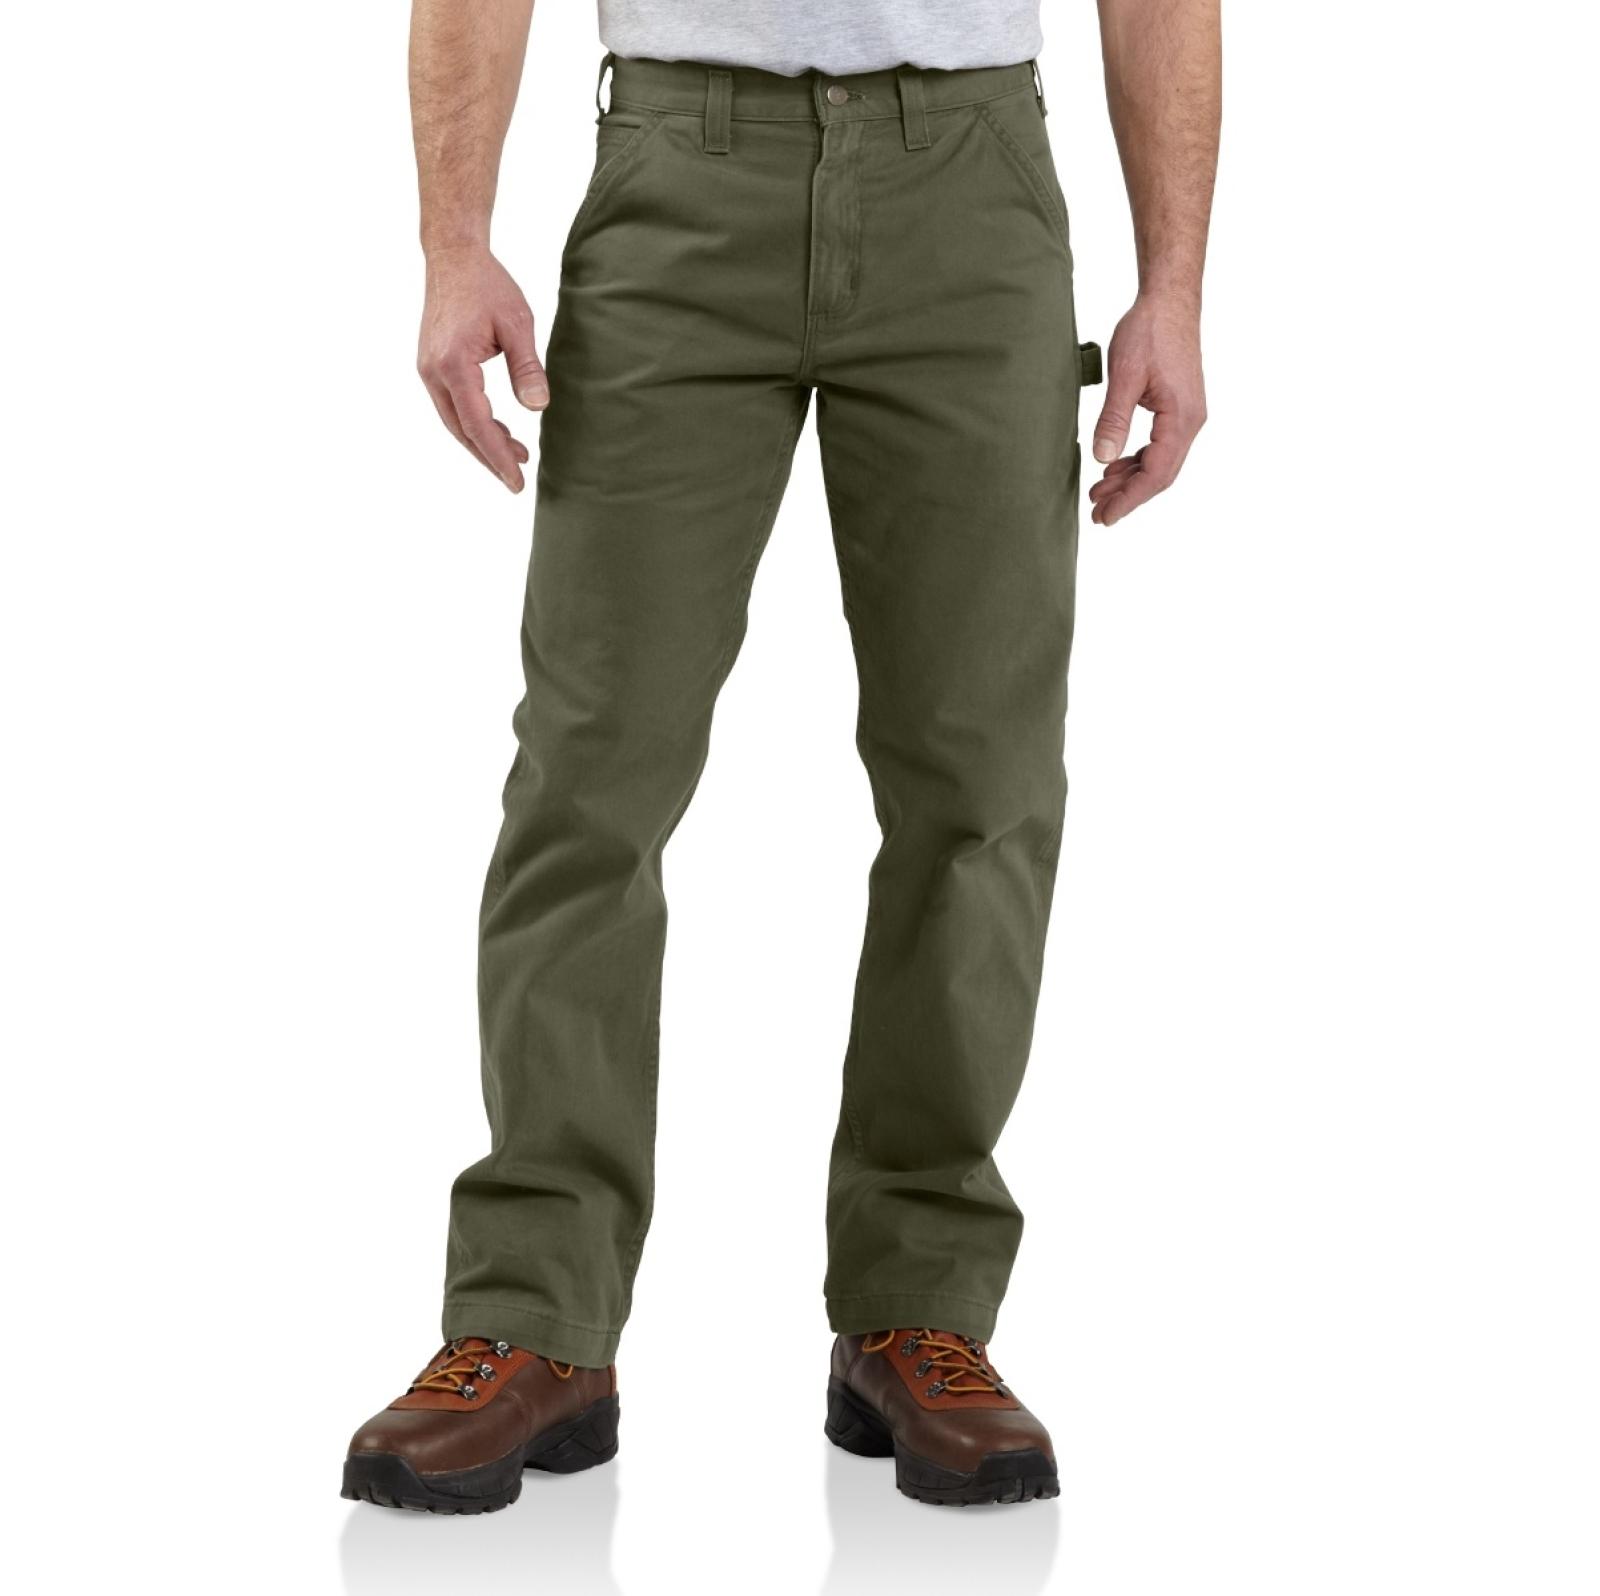 Carhartt Mens Washed Twill Relaxed Fit Work Pant